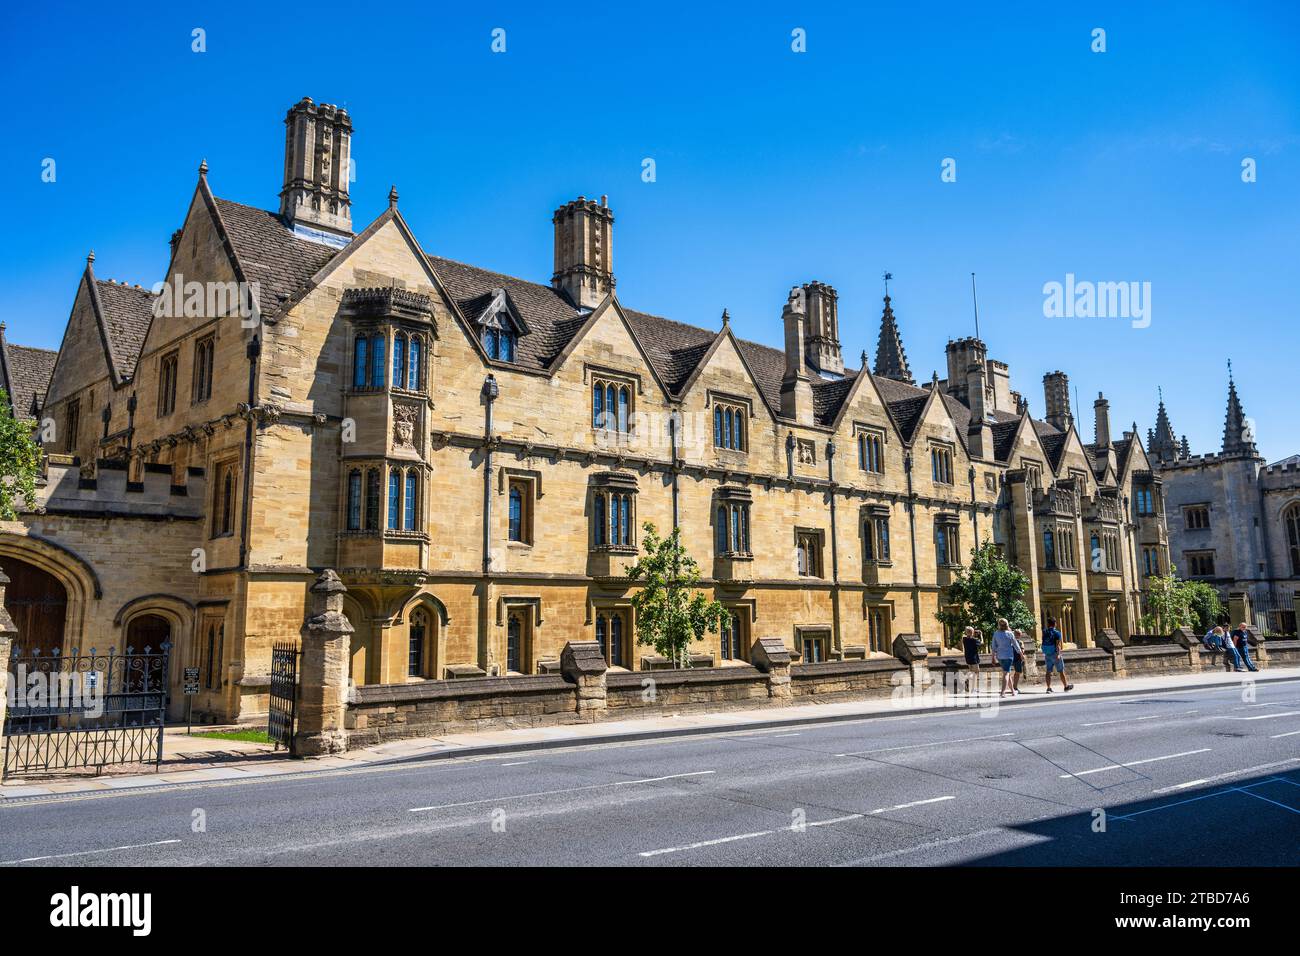 St Swithun's Quad, Magdalen College, University of Oxford, from the High Street in Oxford City Centre, Oxfordshire, Inghilterra, Regno Unito Foto Stock